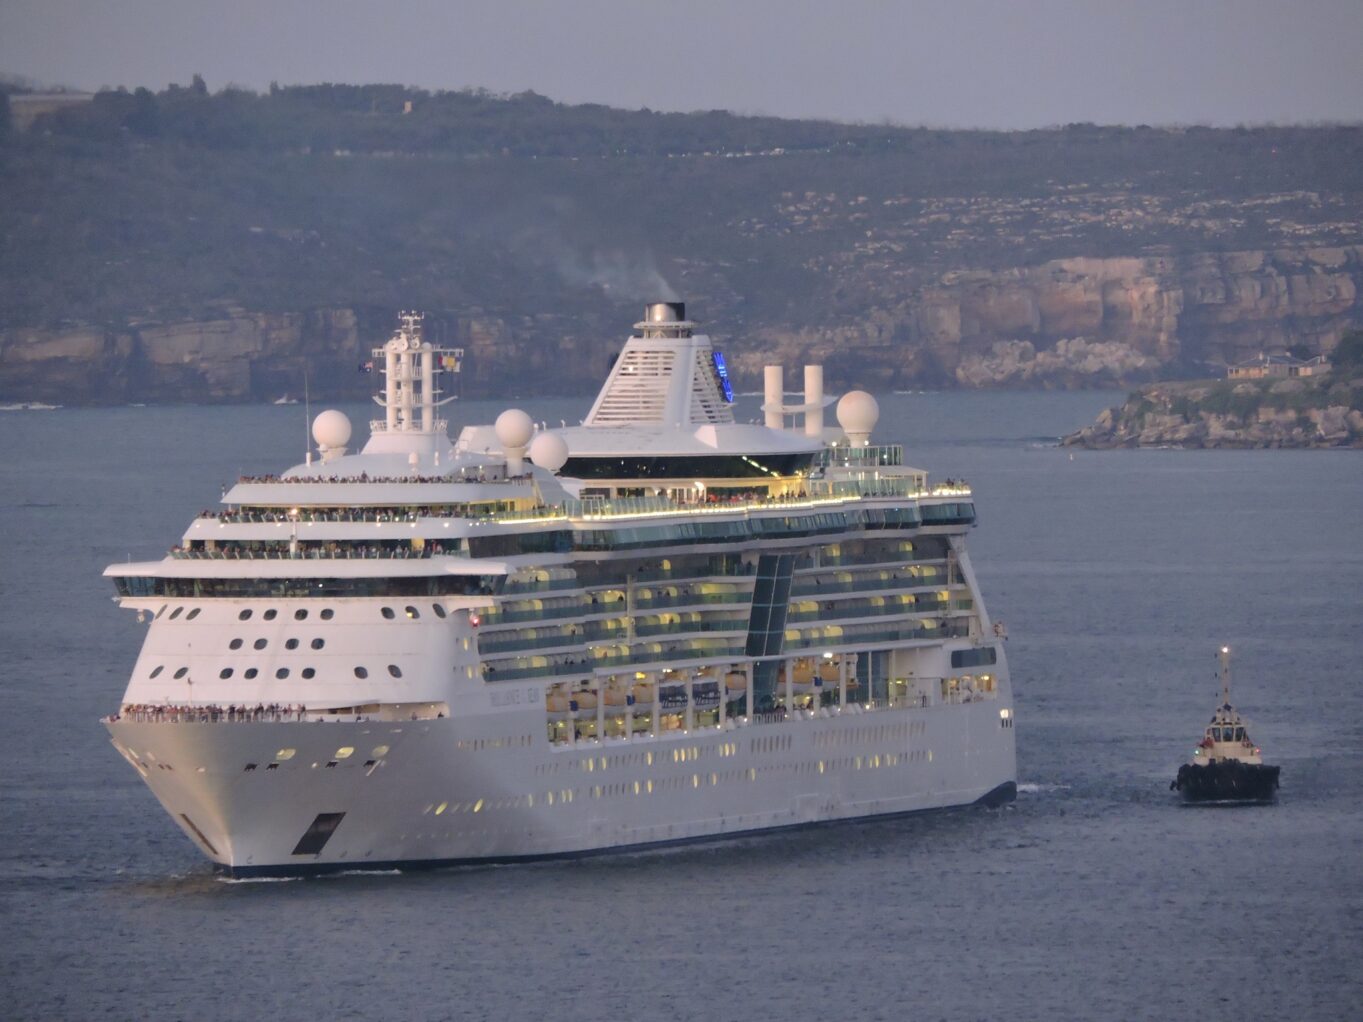 Royal Caribbean’s Brilliance of the Seas is escorted back into Sydney by tugs after experiencing propulsion issues.